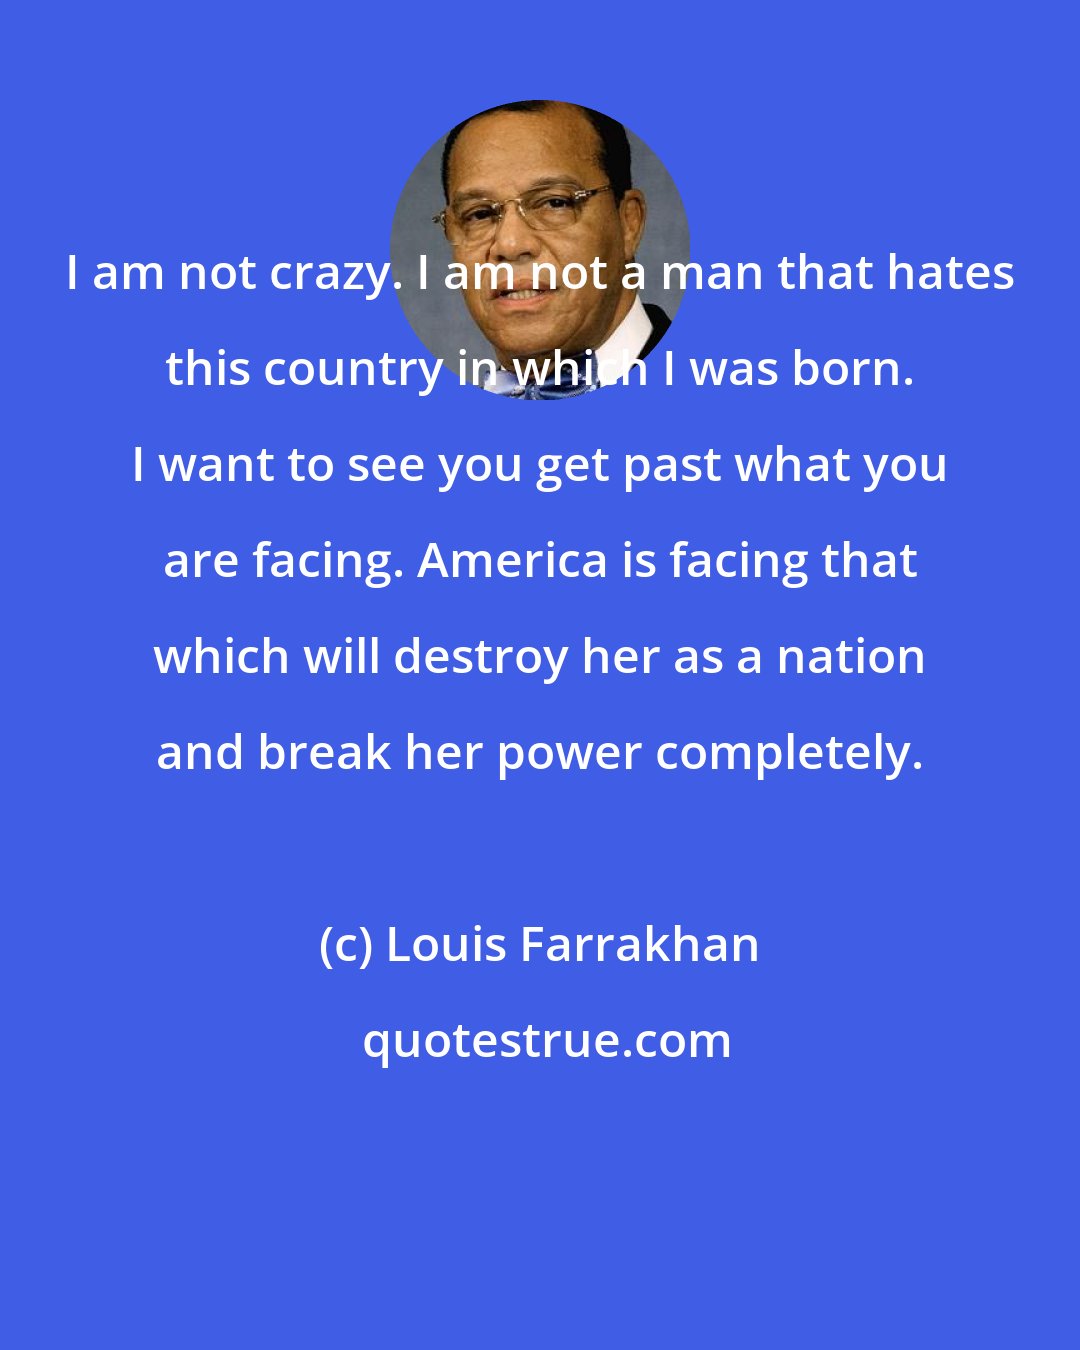 Louis Farrakhan: I am not crazy. I am not a man that hates this country in which I was born. I want to see you get past what you are facing. America is facing that which will destroy her as a nation and break her power completely.